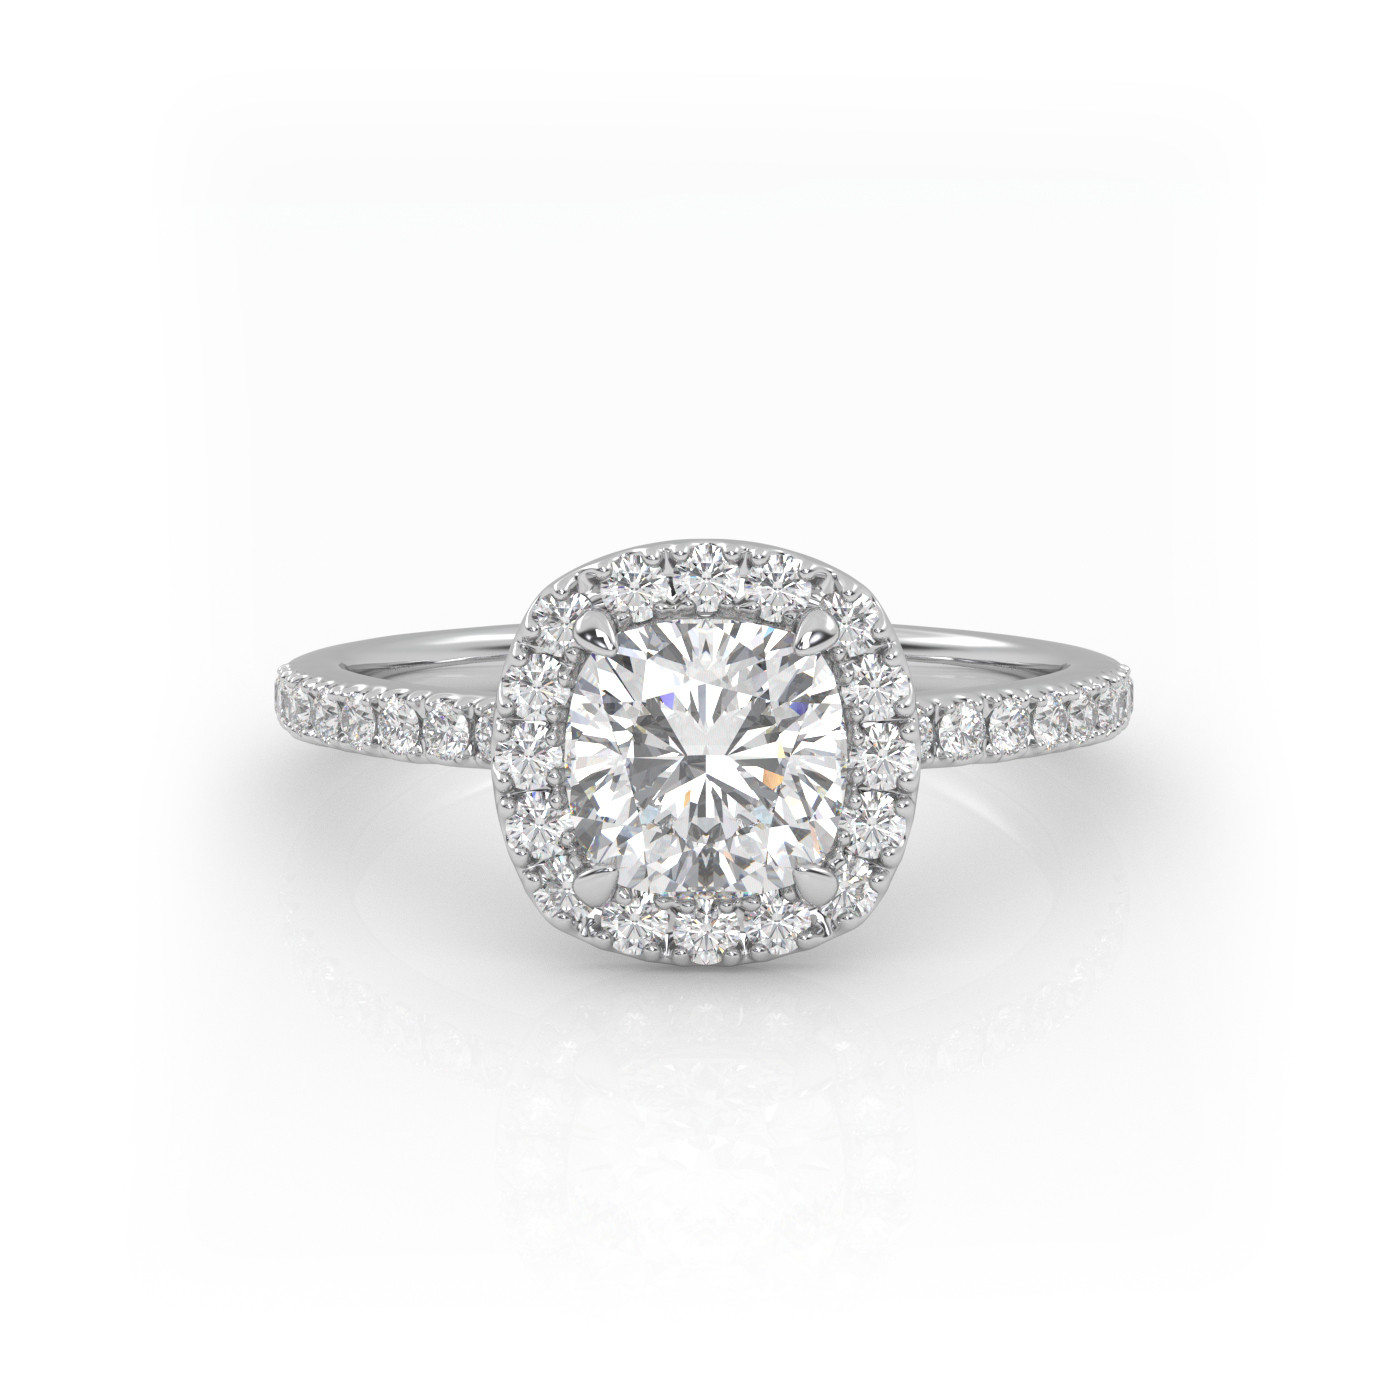 18K WHITE GOLD Cushion Diamond Engagement Ring With Pave and Halo Style